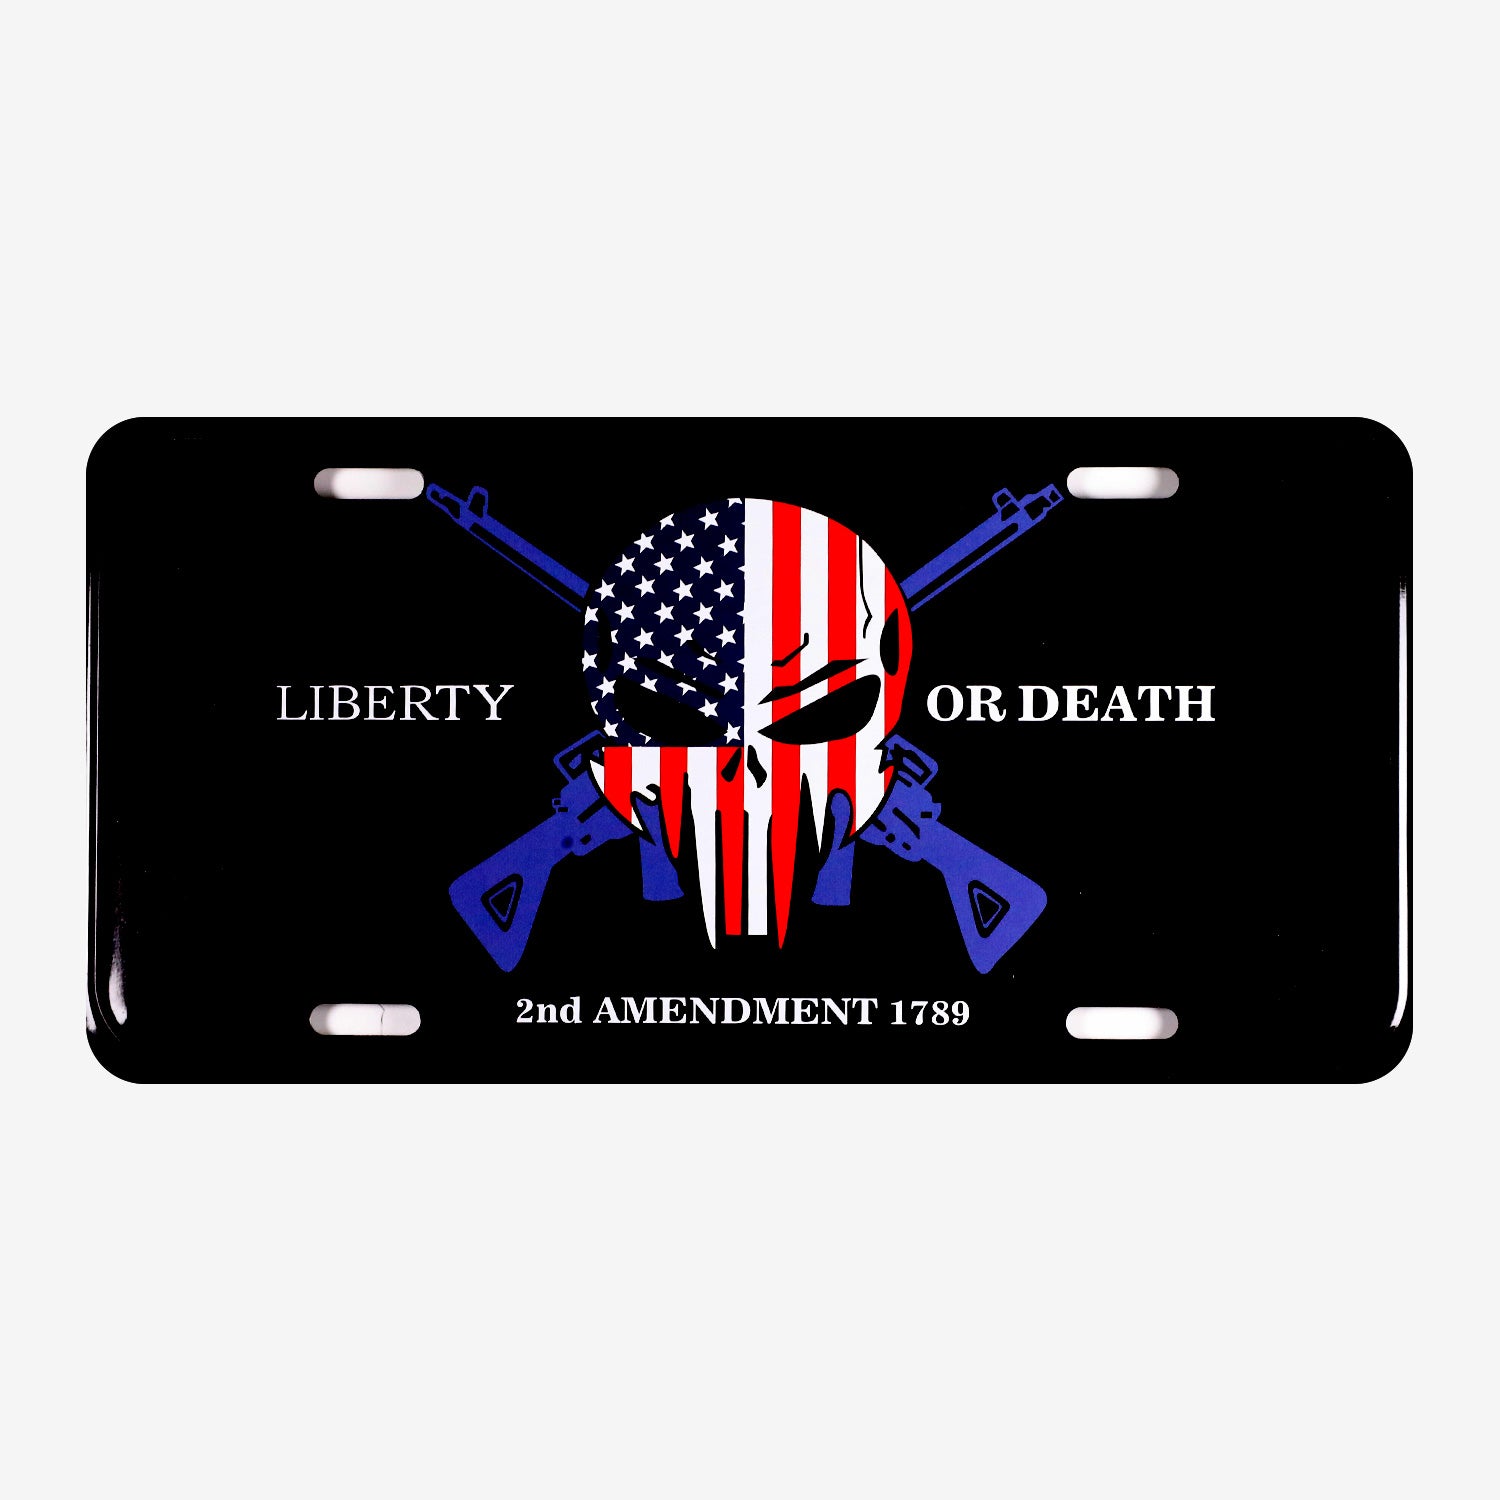 Liberty or Death License Plate Cover